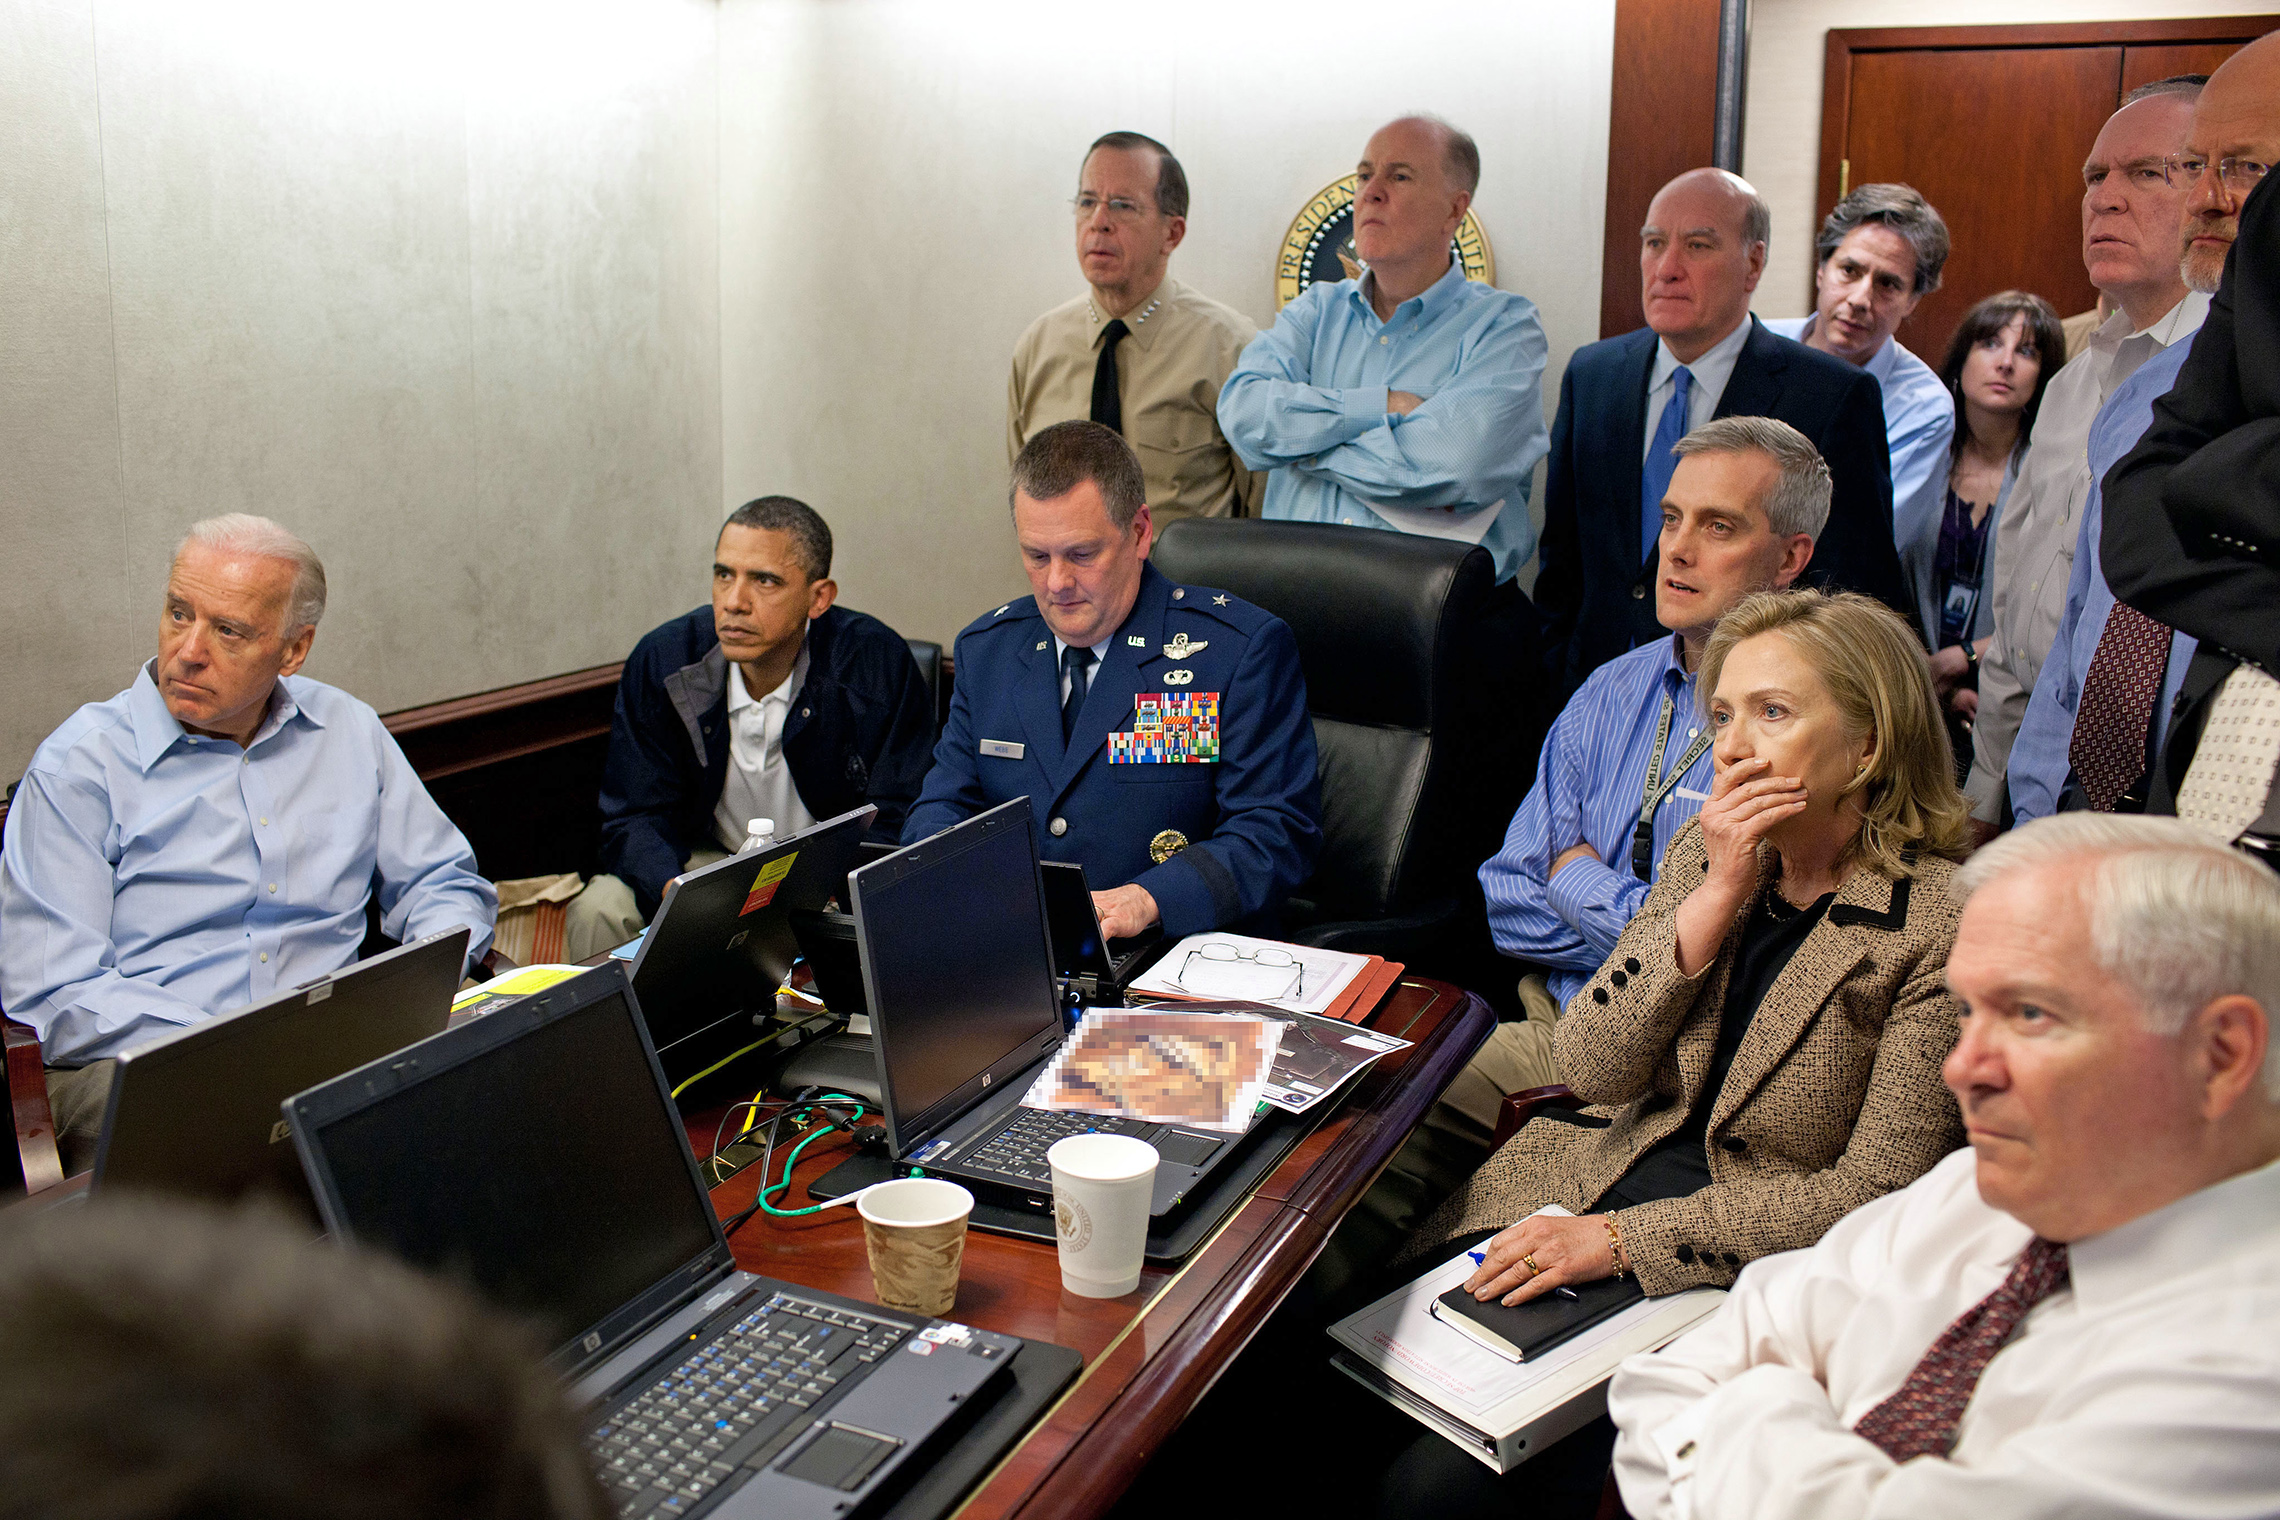 May 1, 2011: In the White House Situation Room, President Barack Obama and members of his national security team monitor the raid on Osama bin Laden's compound in Pakistan. He is joined by Vice President Joe Biden (seated, left) and Secretary of State Hillary Clinton and Defense Secretary Robert Gates (both seated, right). As they watch drone video of the compound, Admiral William McRaven gives them a live briefing by secure video link from a base in Jalalabad, Afghanistan. (White House photo)